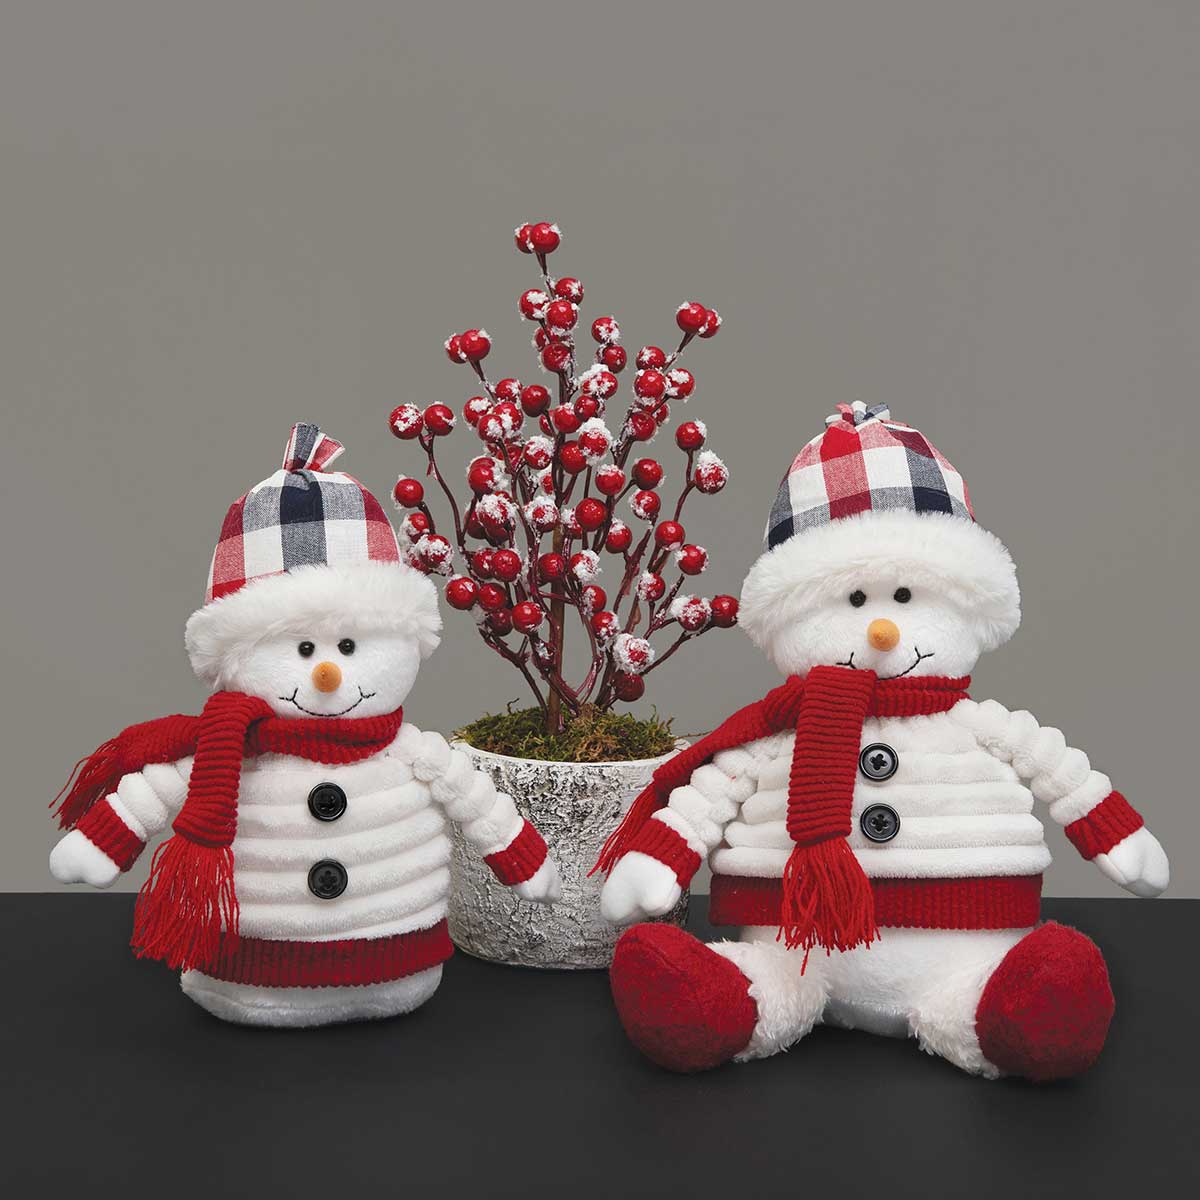 SNOWMAN WITH JACKET 5IN X 8IN WHITE/RED